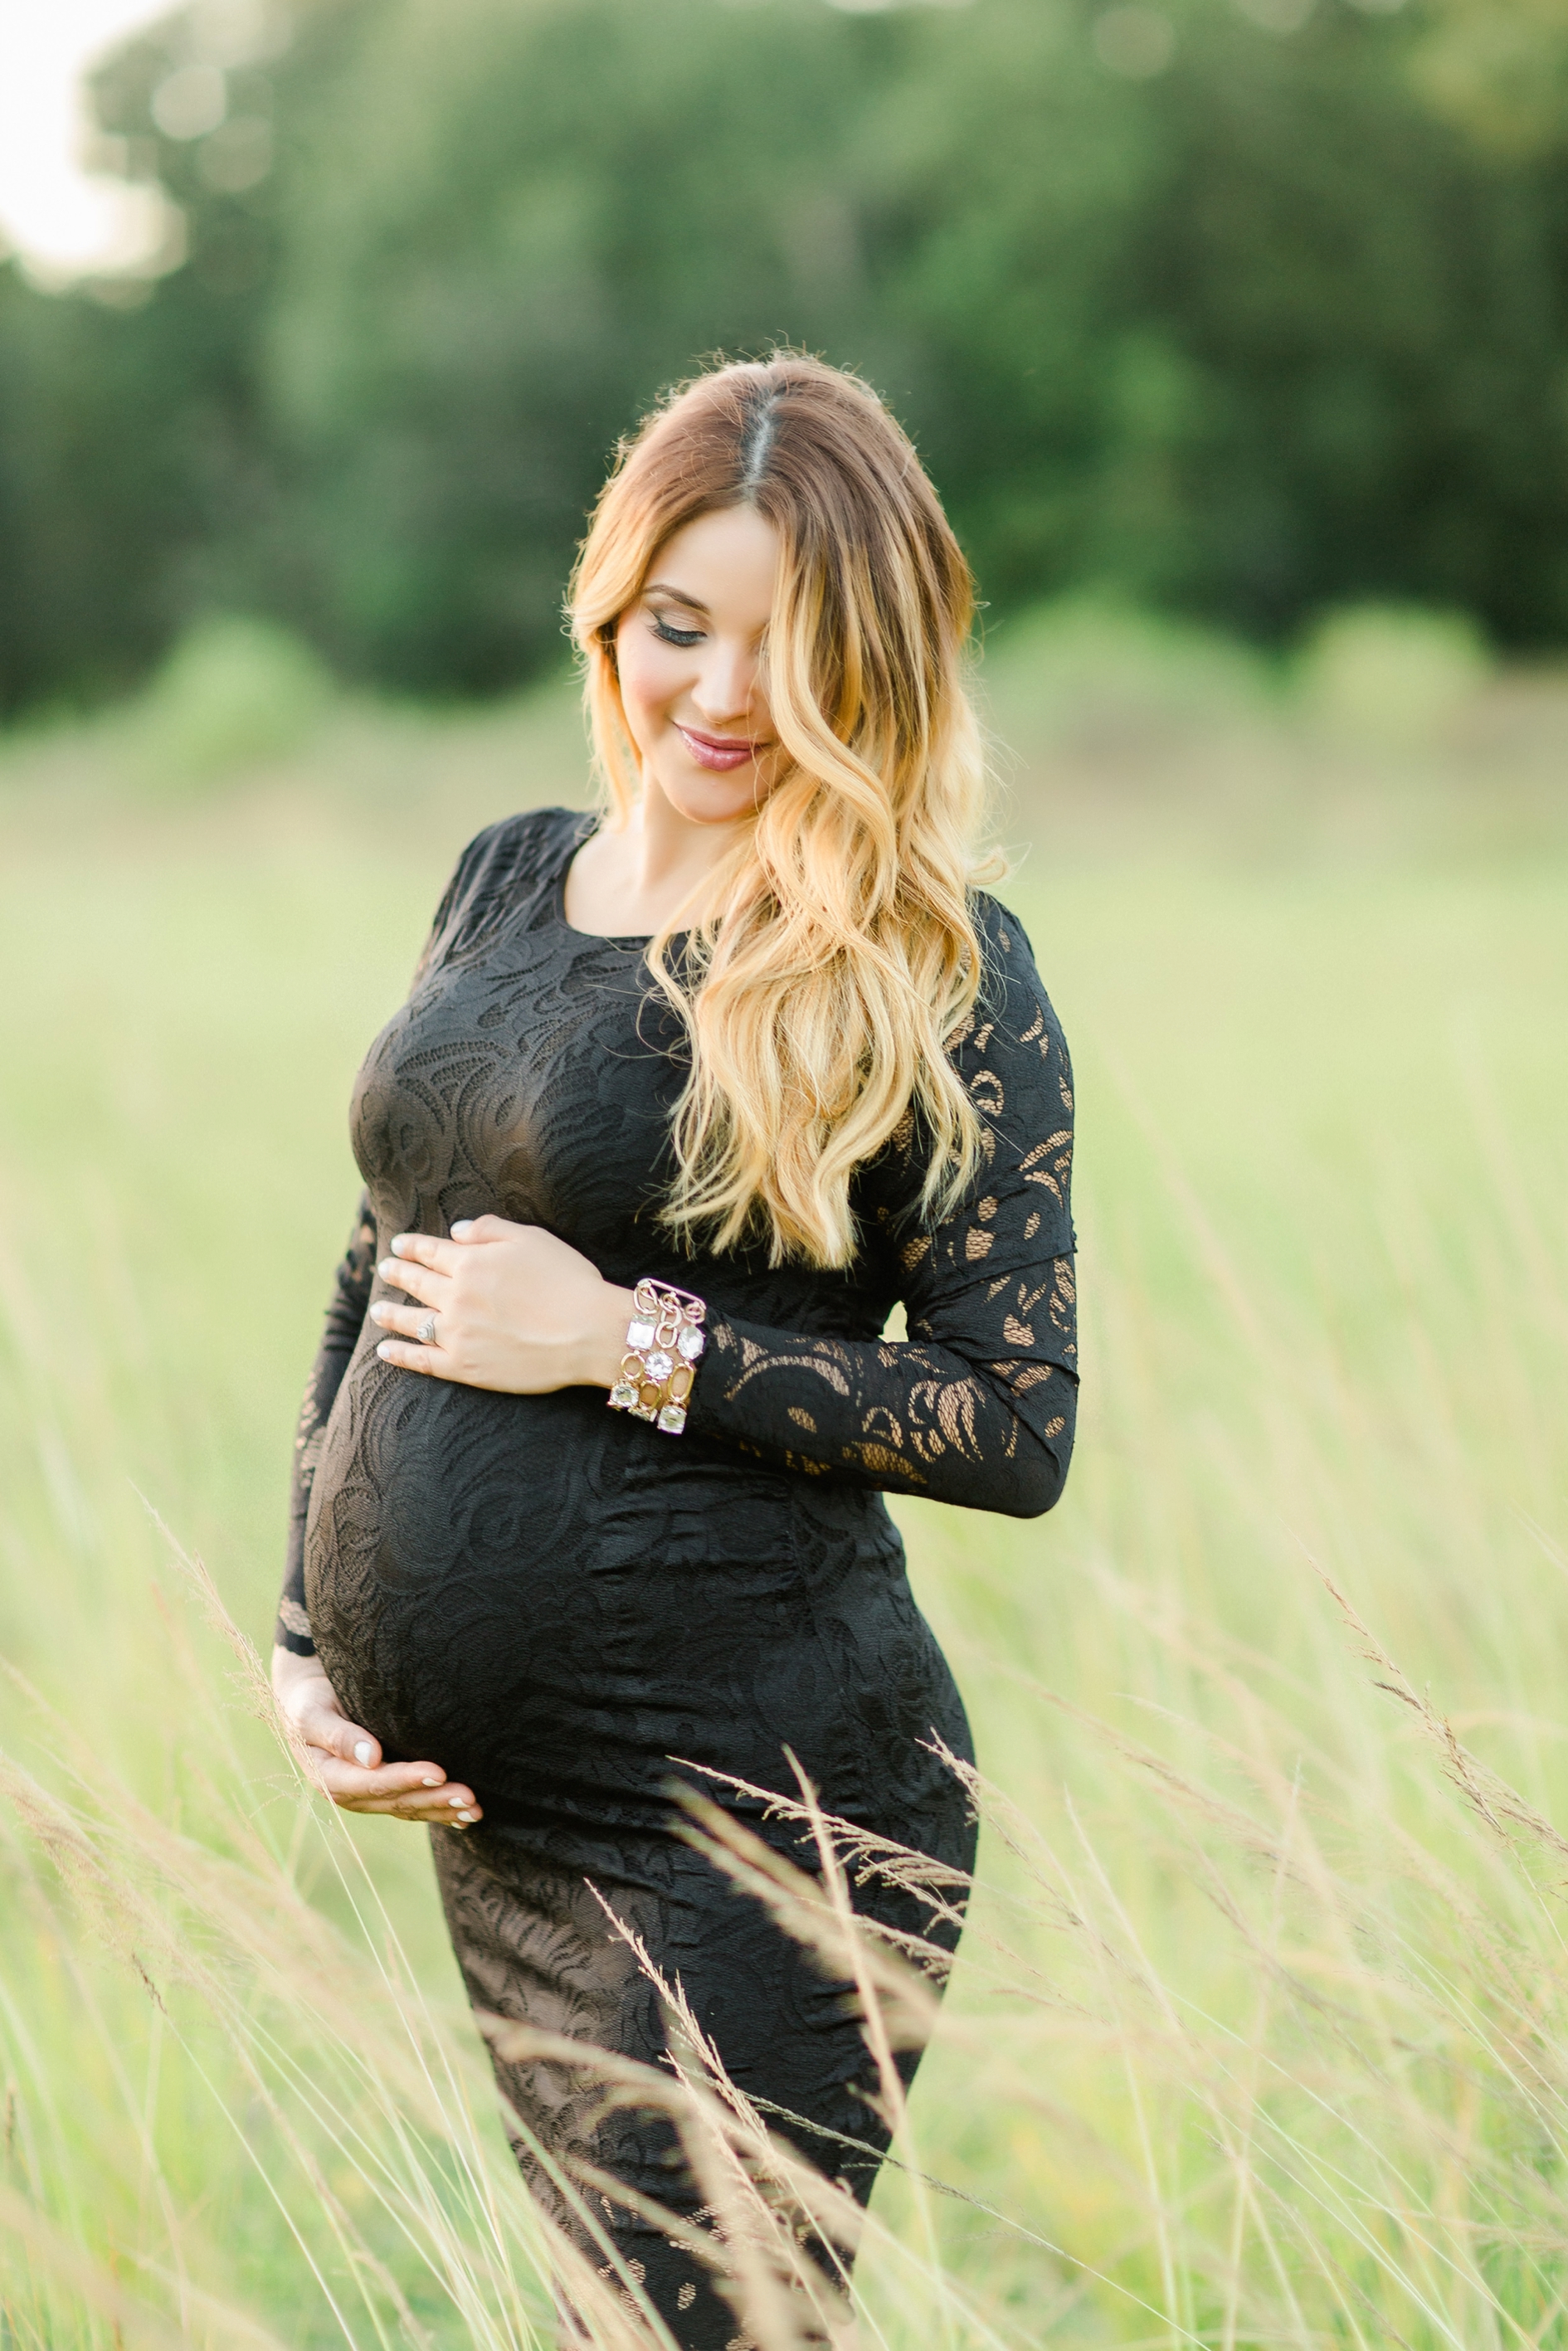 Tampa Maternity | © Ailyn La Torre Photography 2015